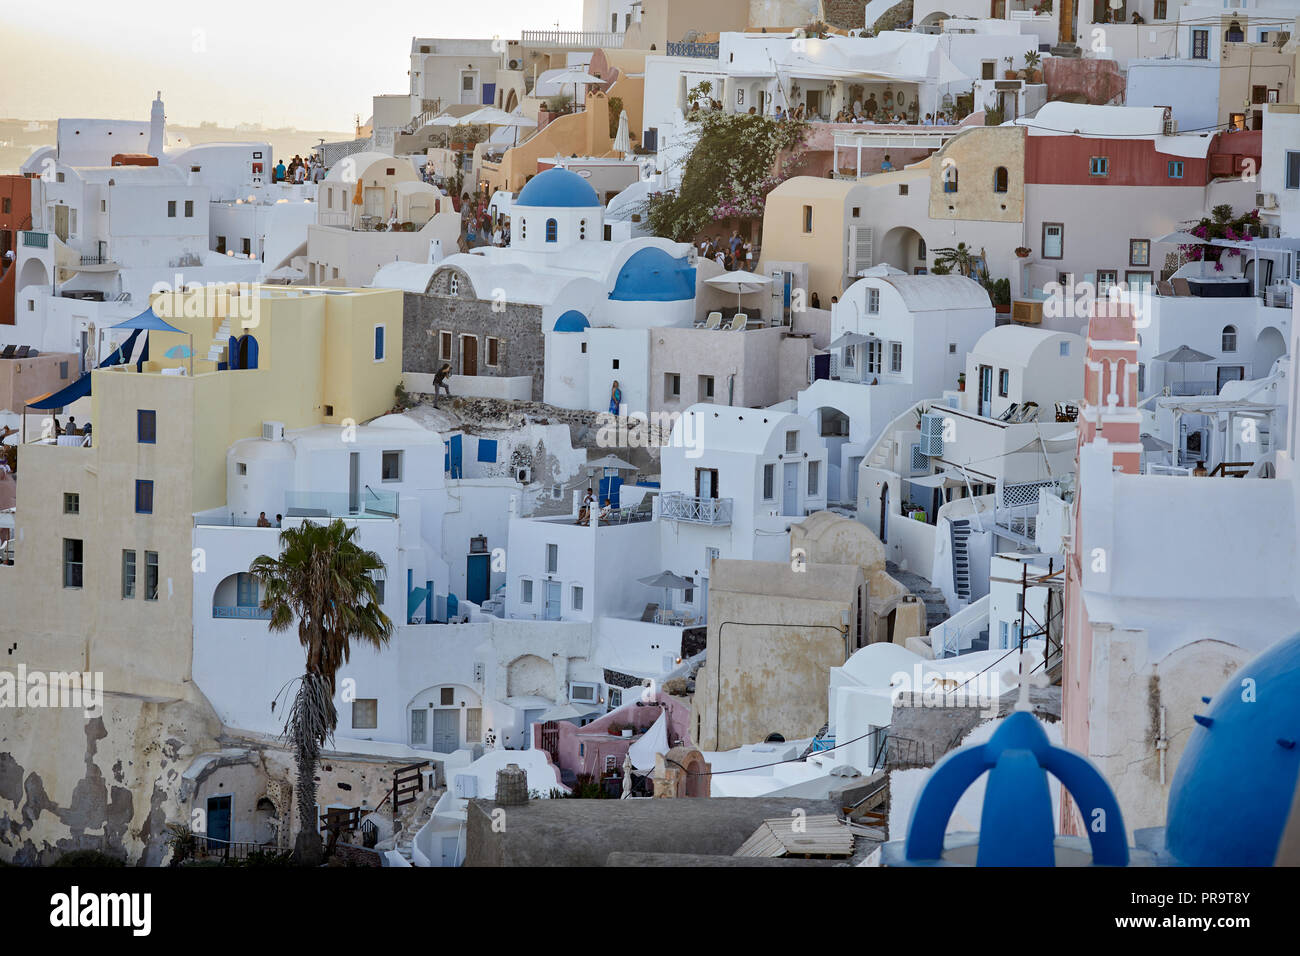 traditional cliff side houses of  Oia landmark blue dome churches Santorini, a Cyclades group of islands in Greece, tourists walking up the steep hill Stock Photo